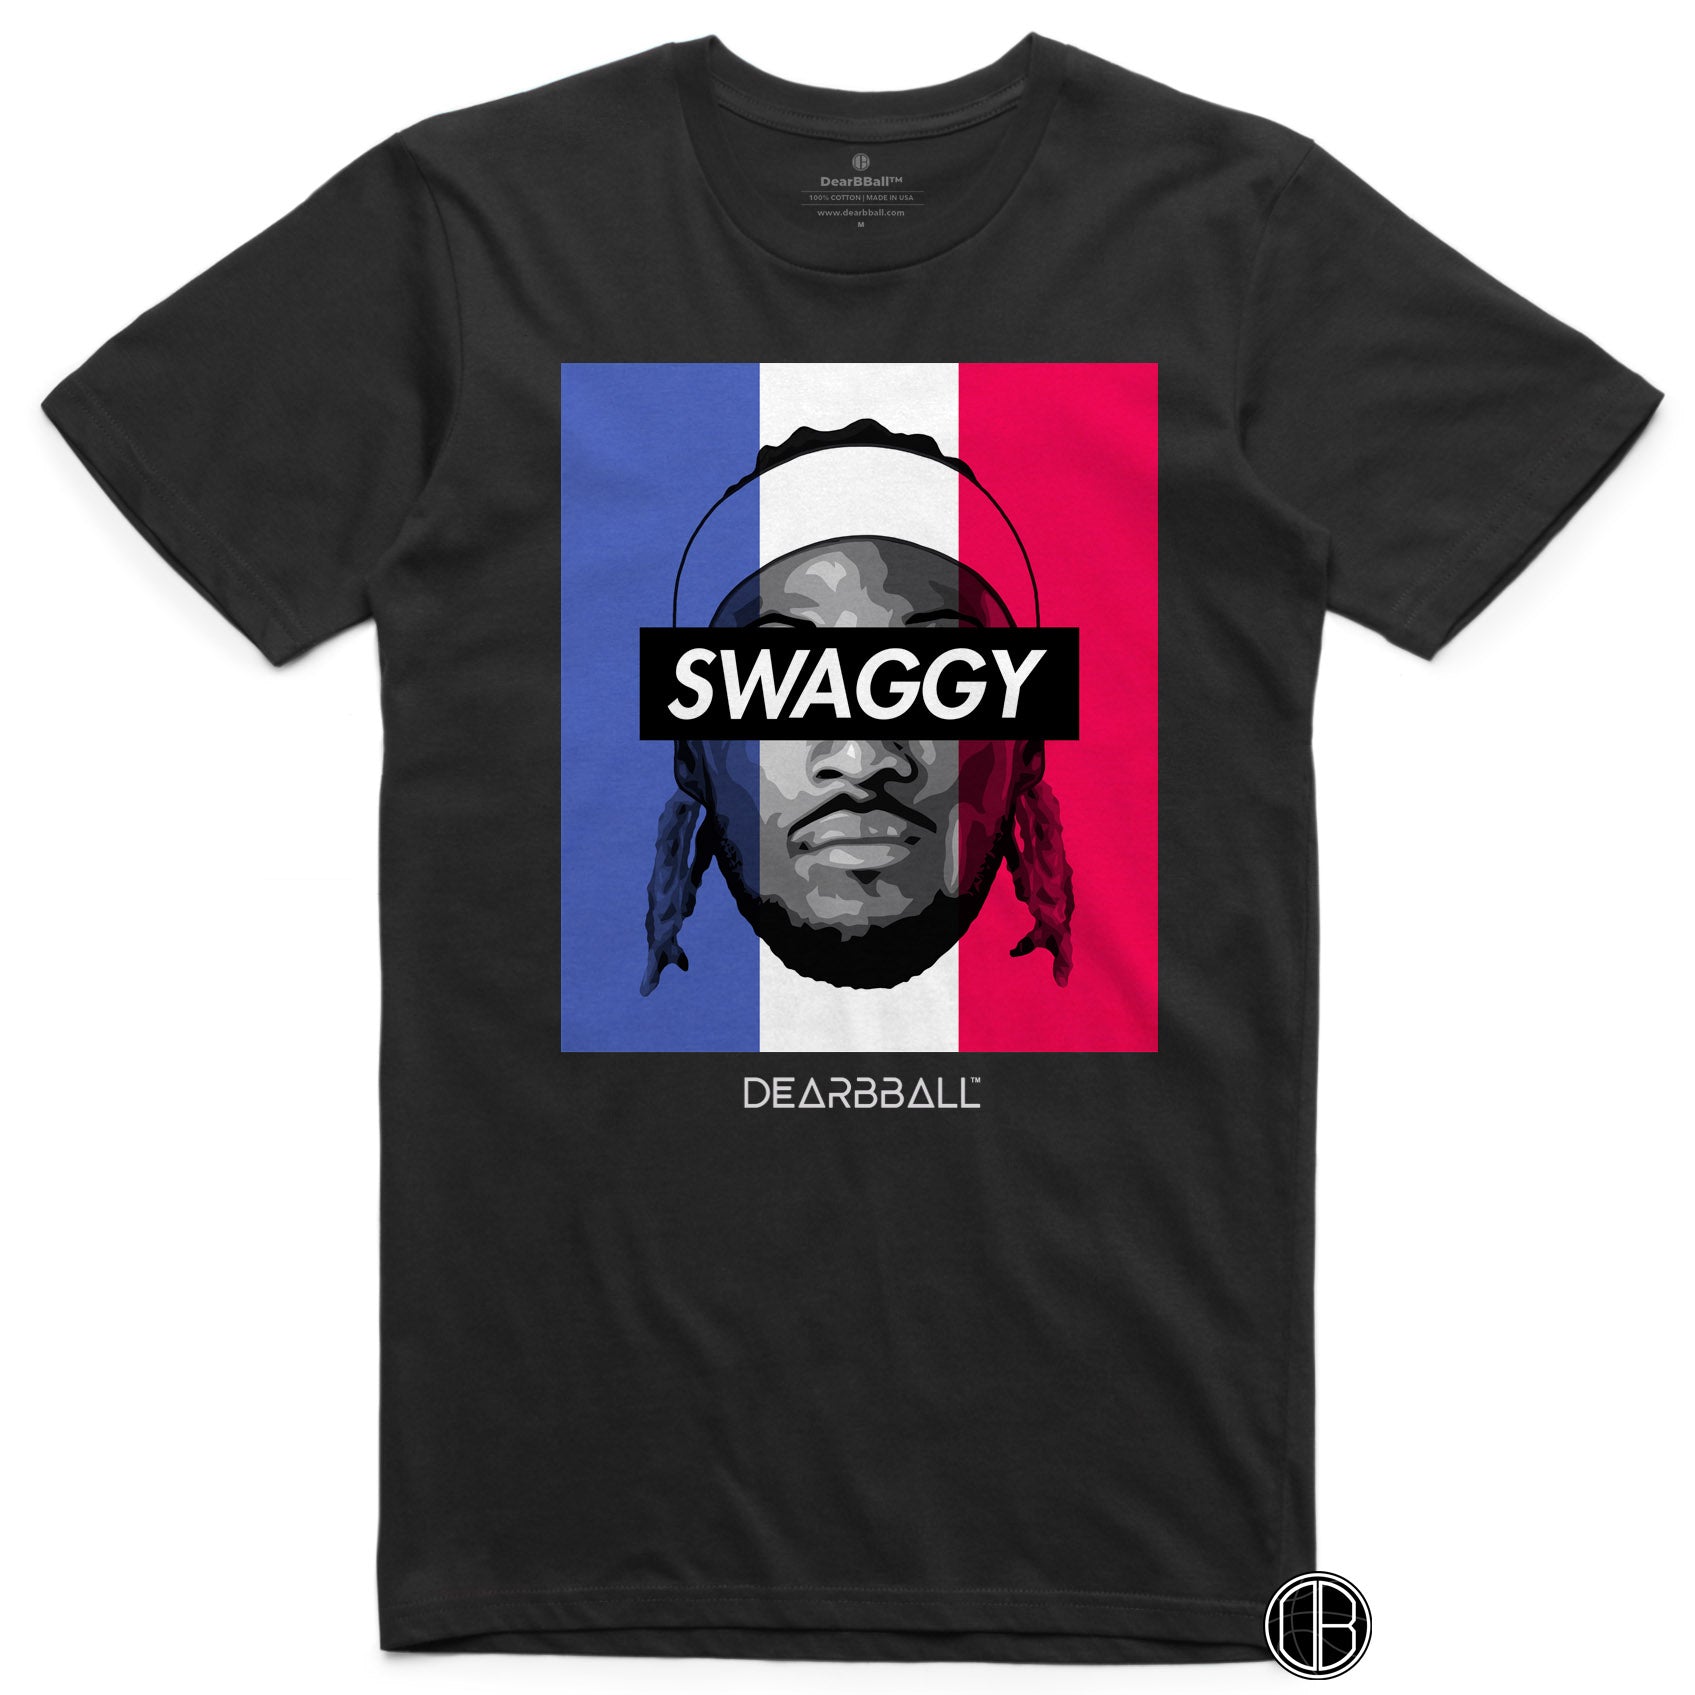 DearBBall T-Shirt - SWAGGY France Edition